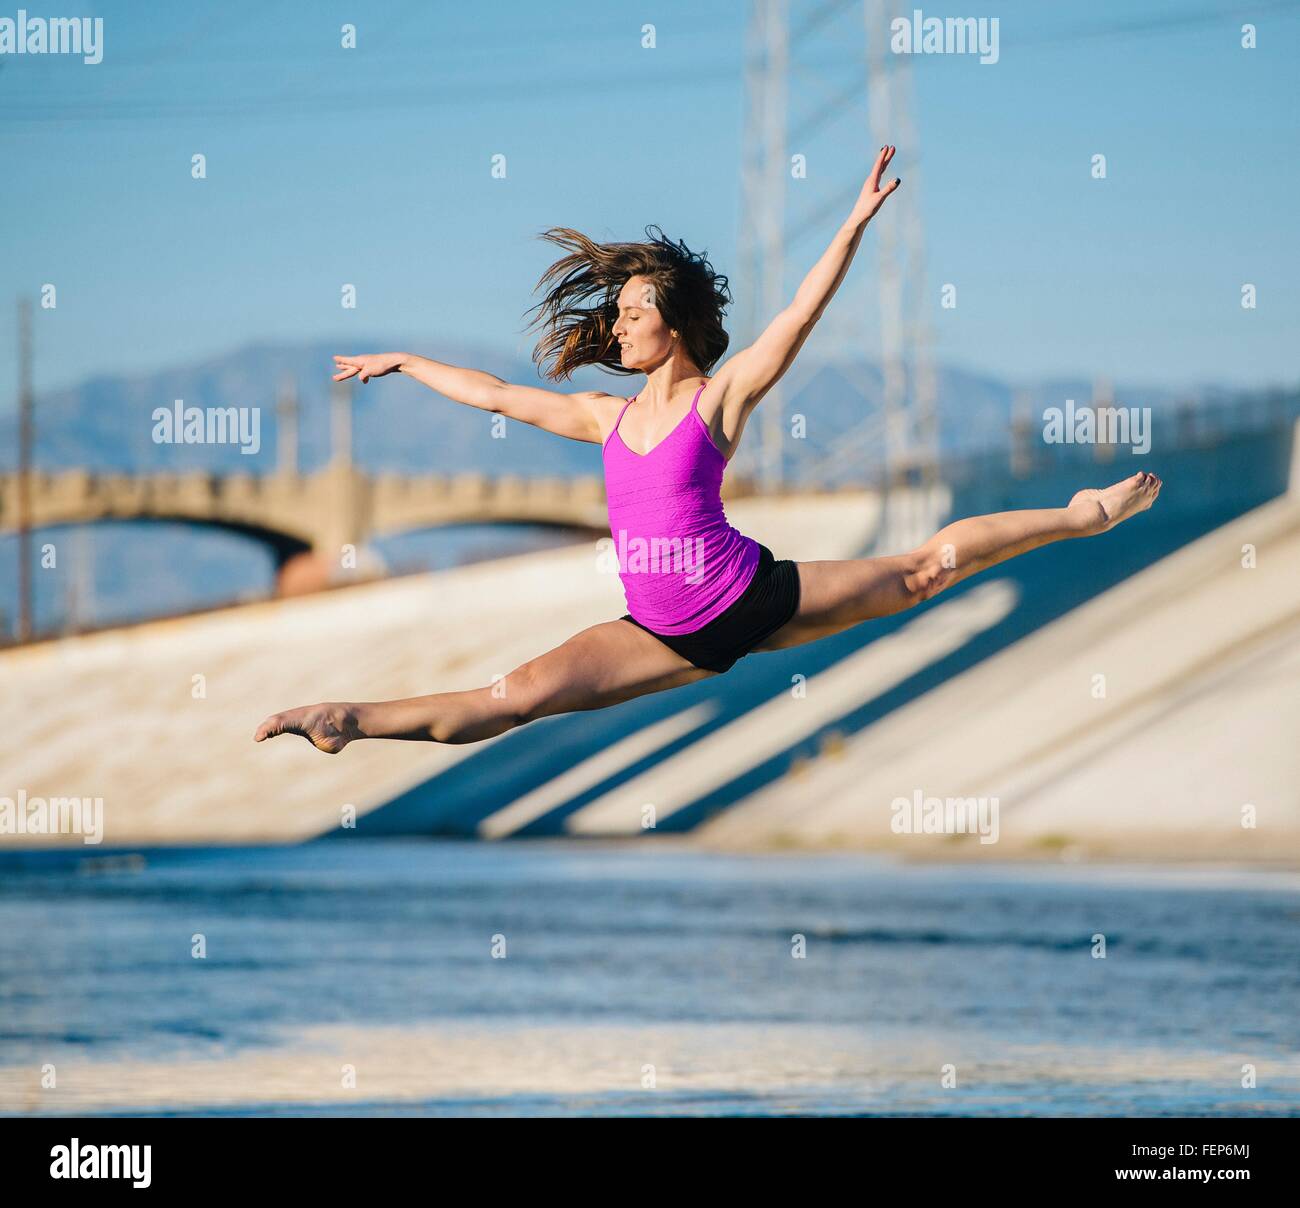 Dancer in mid air, arms raised doing the splits, Los Angeles, California, USA Stock Photo